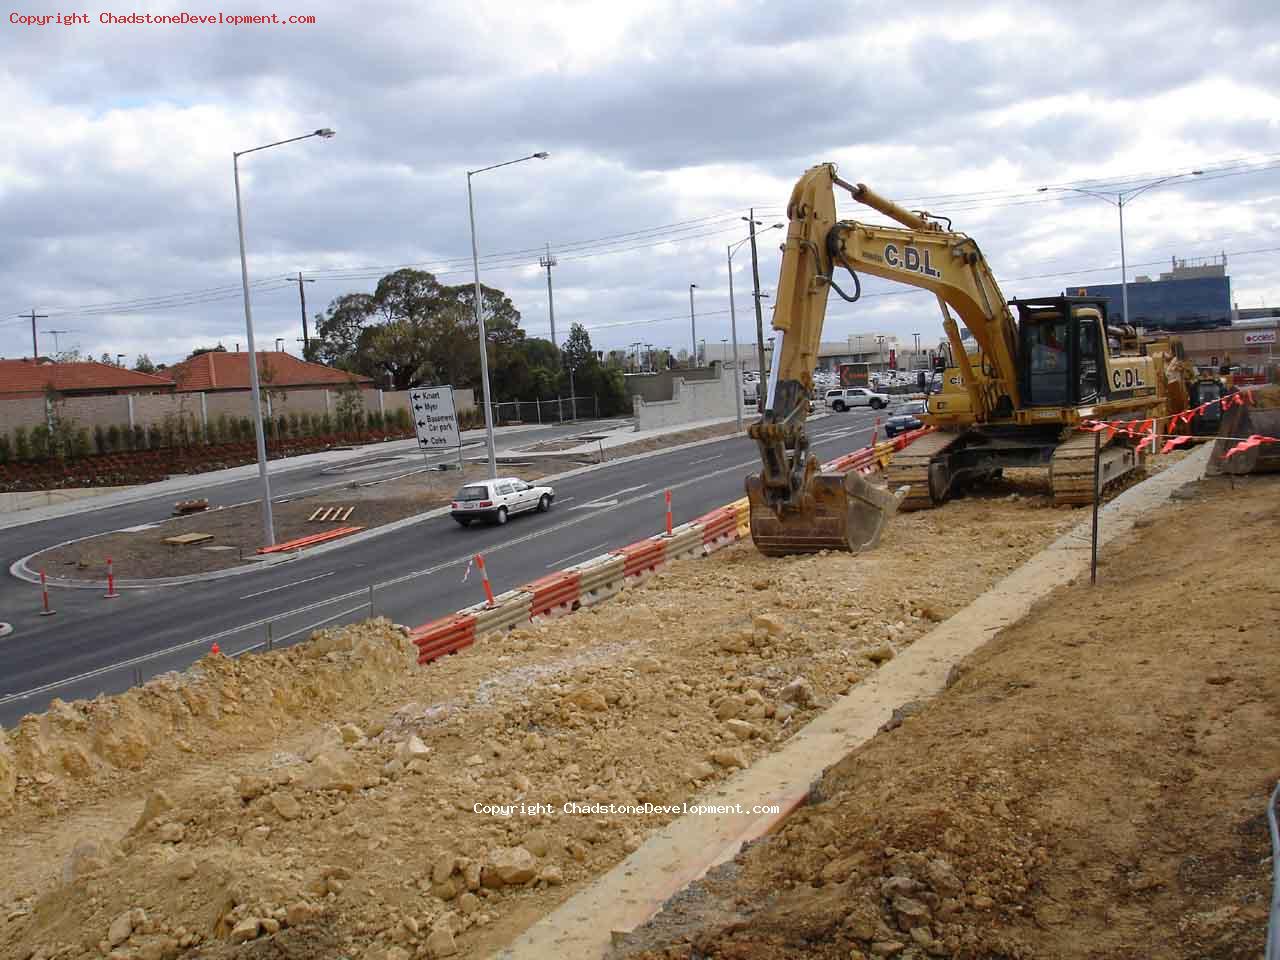 Excavator at western end of Middle Rd - Chadstone Development Discussions